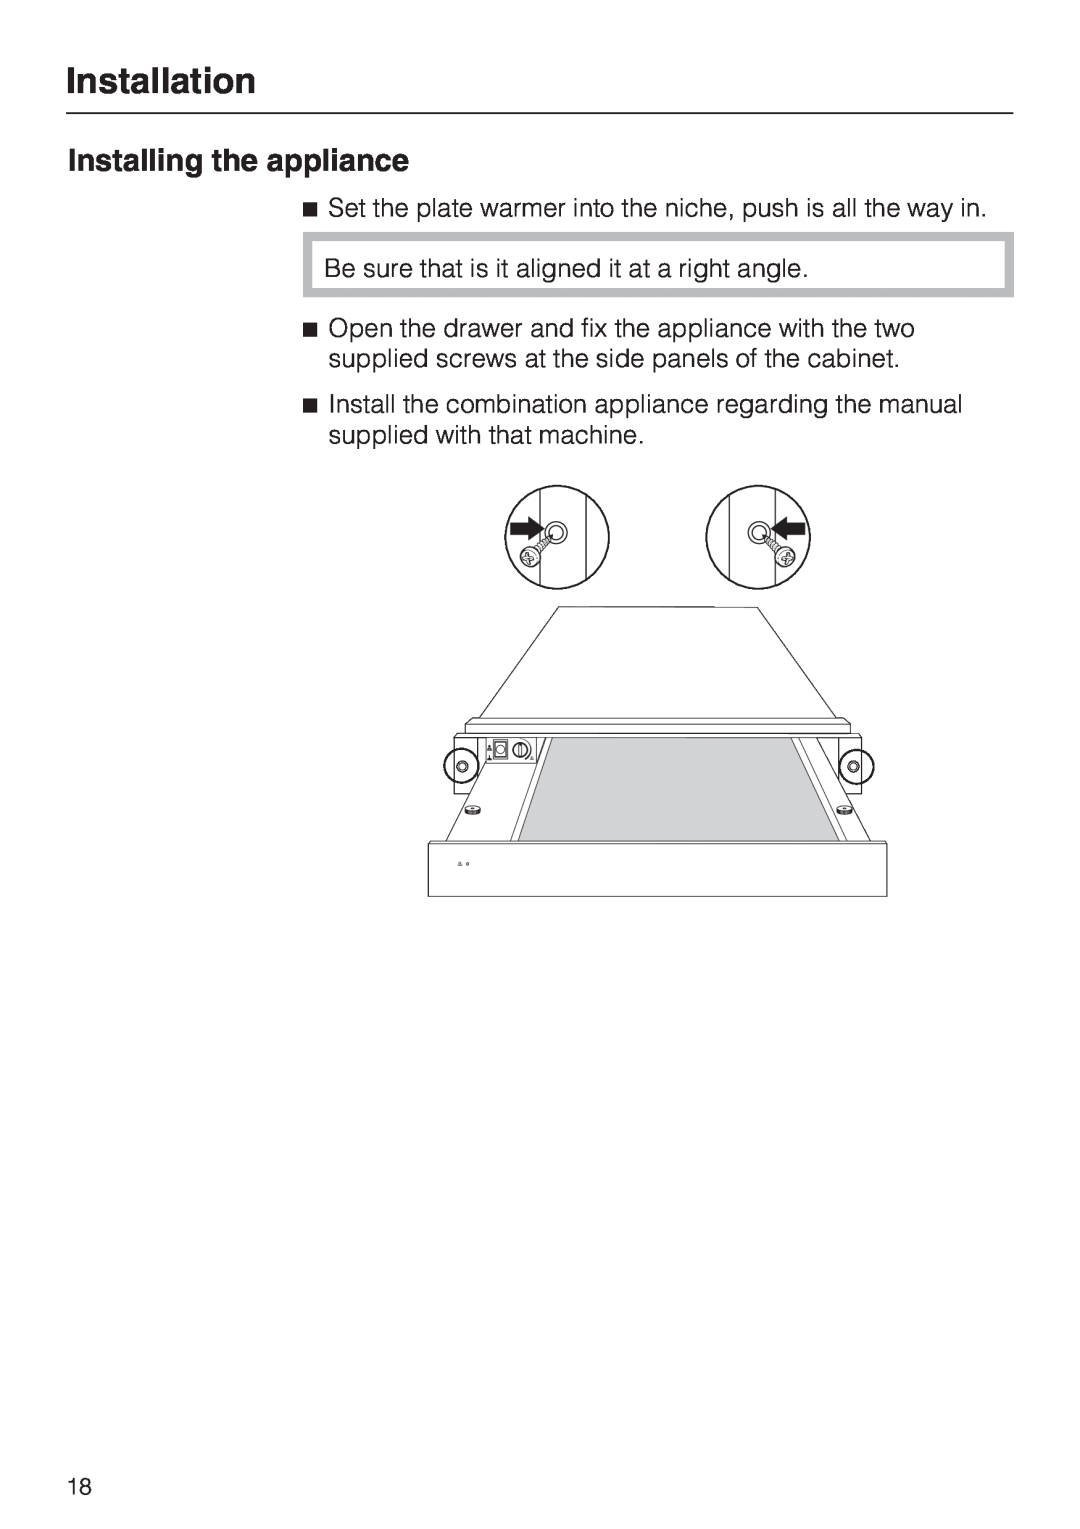 Miele EGW2062 installation instructions Installing the appliance, Installation 